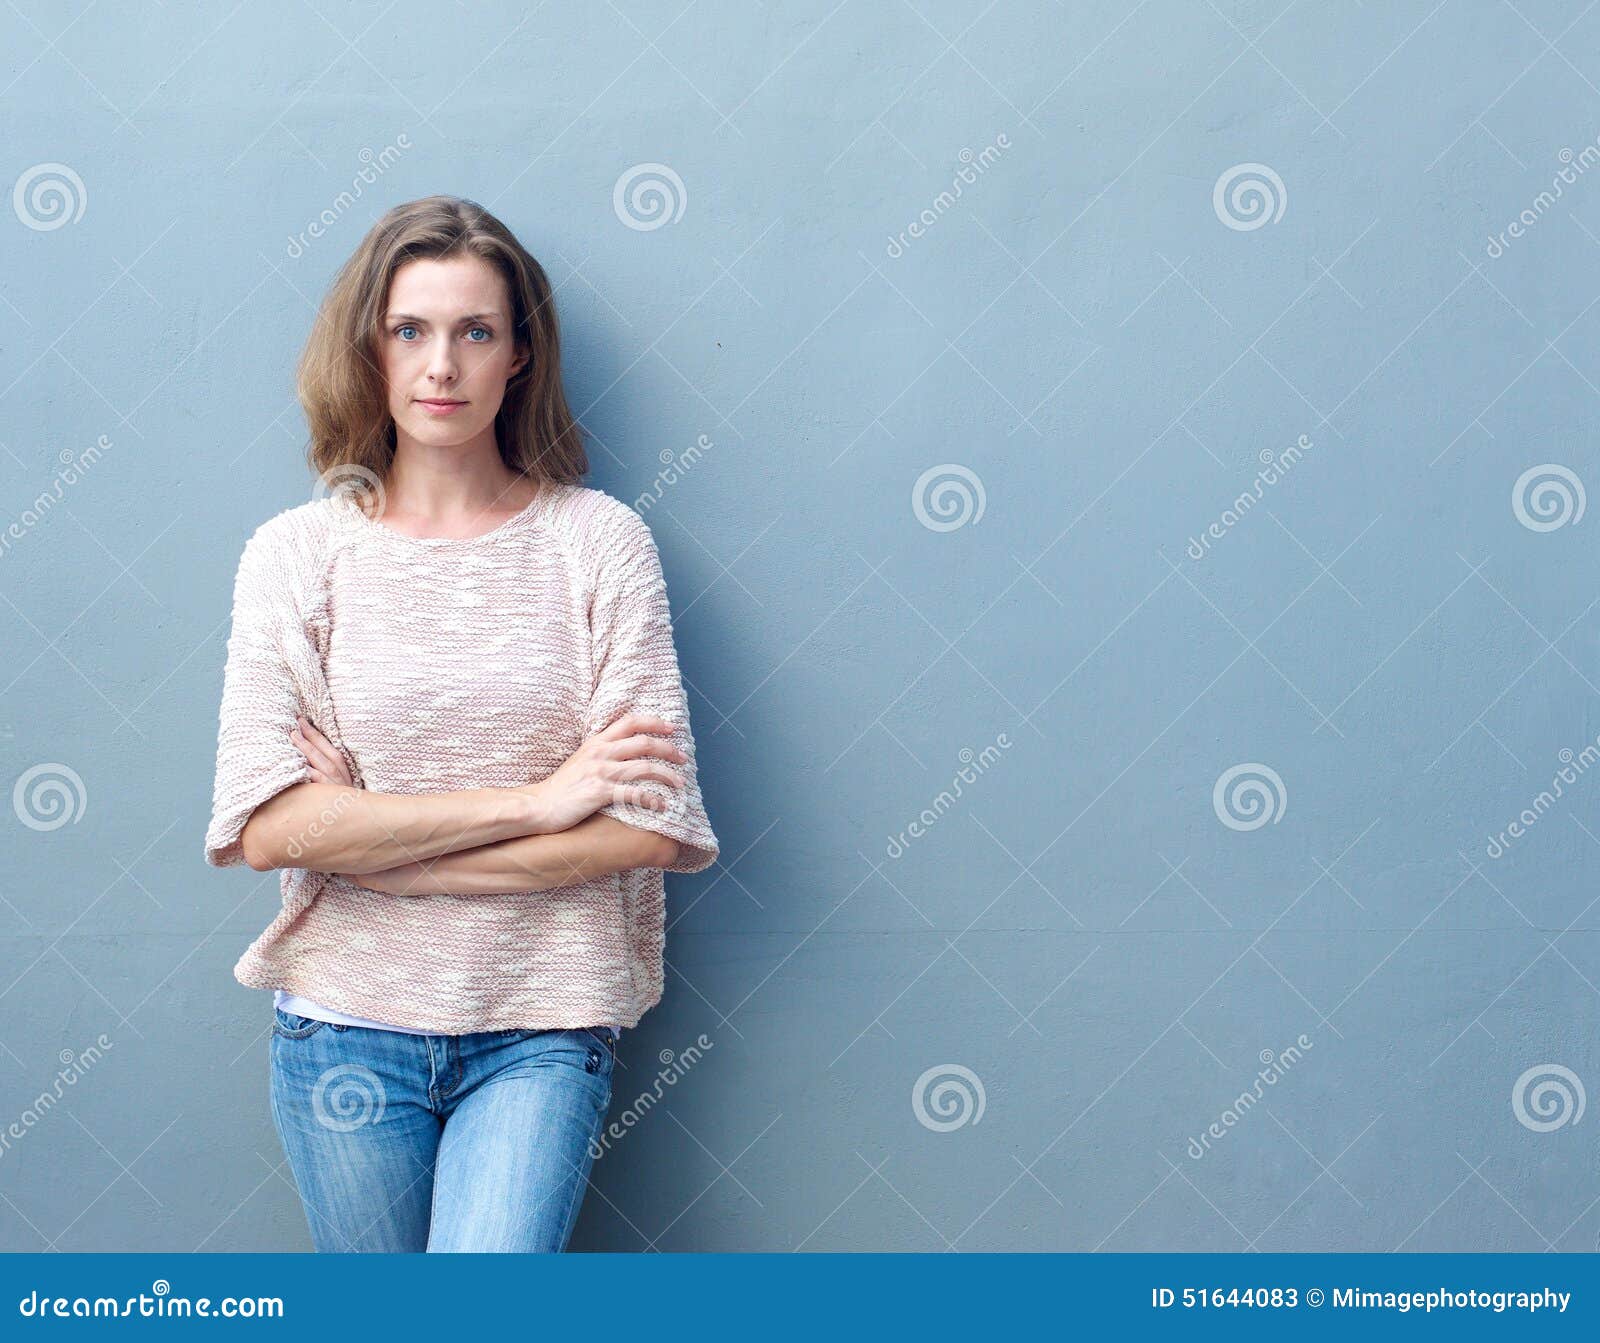 confident mid adult woman posing with arms crossed